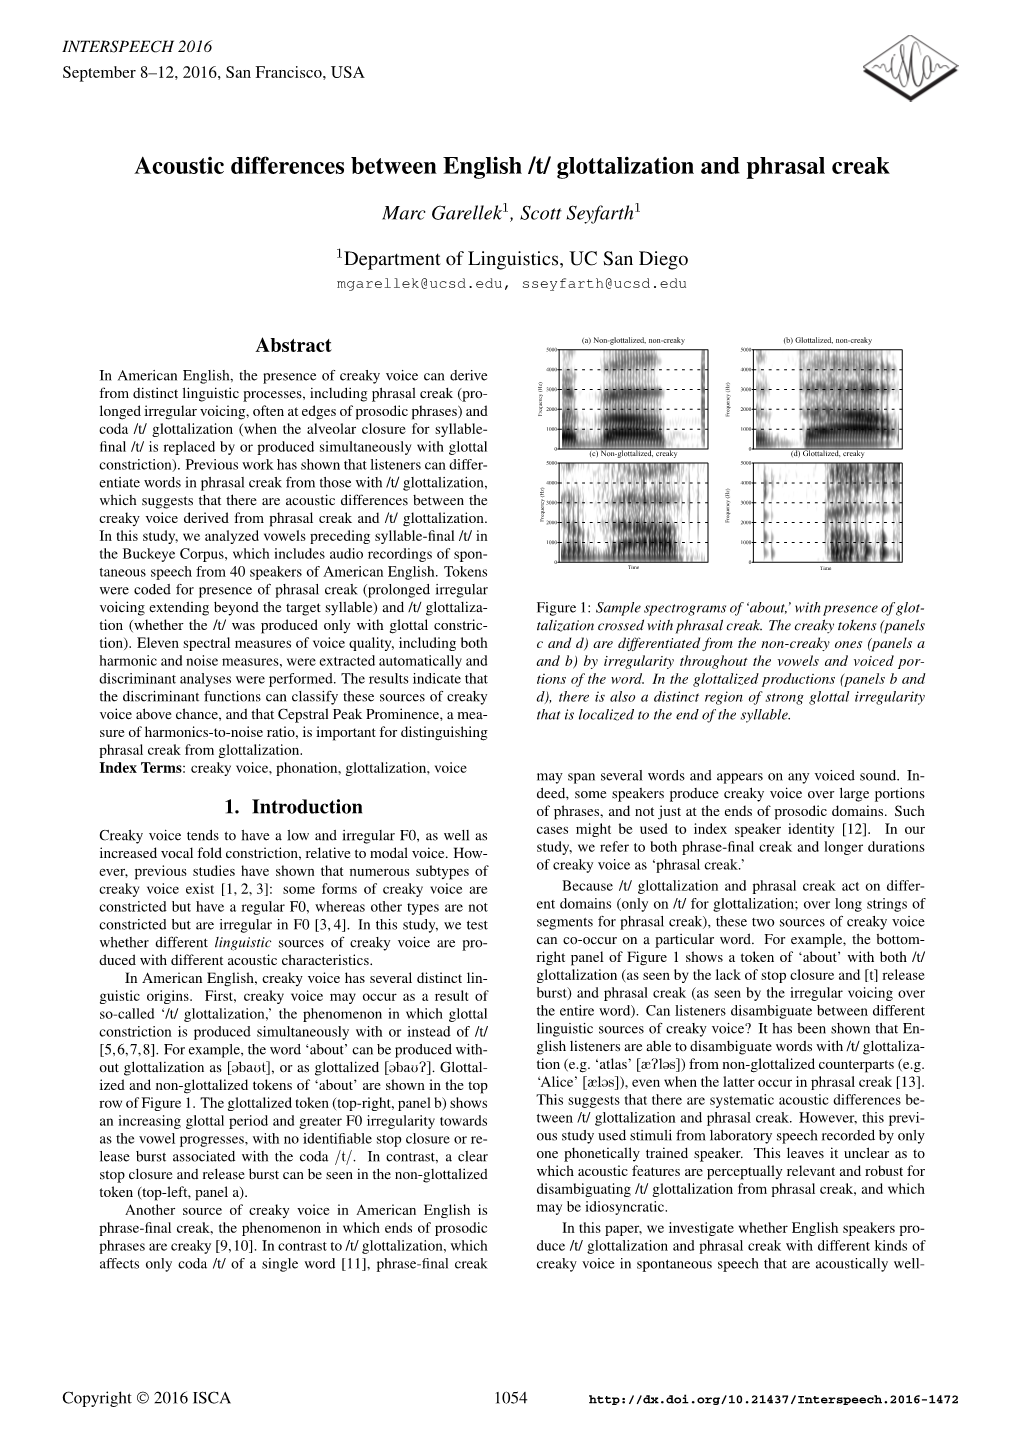 Acoustic Differences Between English /T/ Glottalization and Phrasal Creak